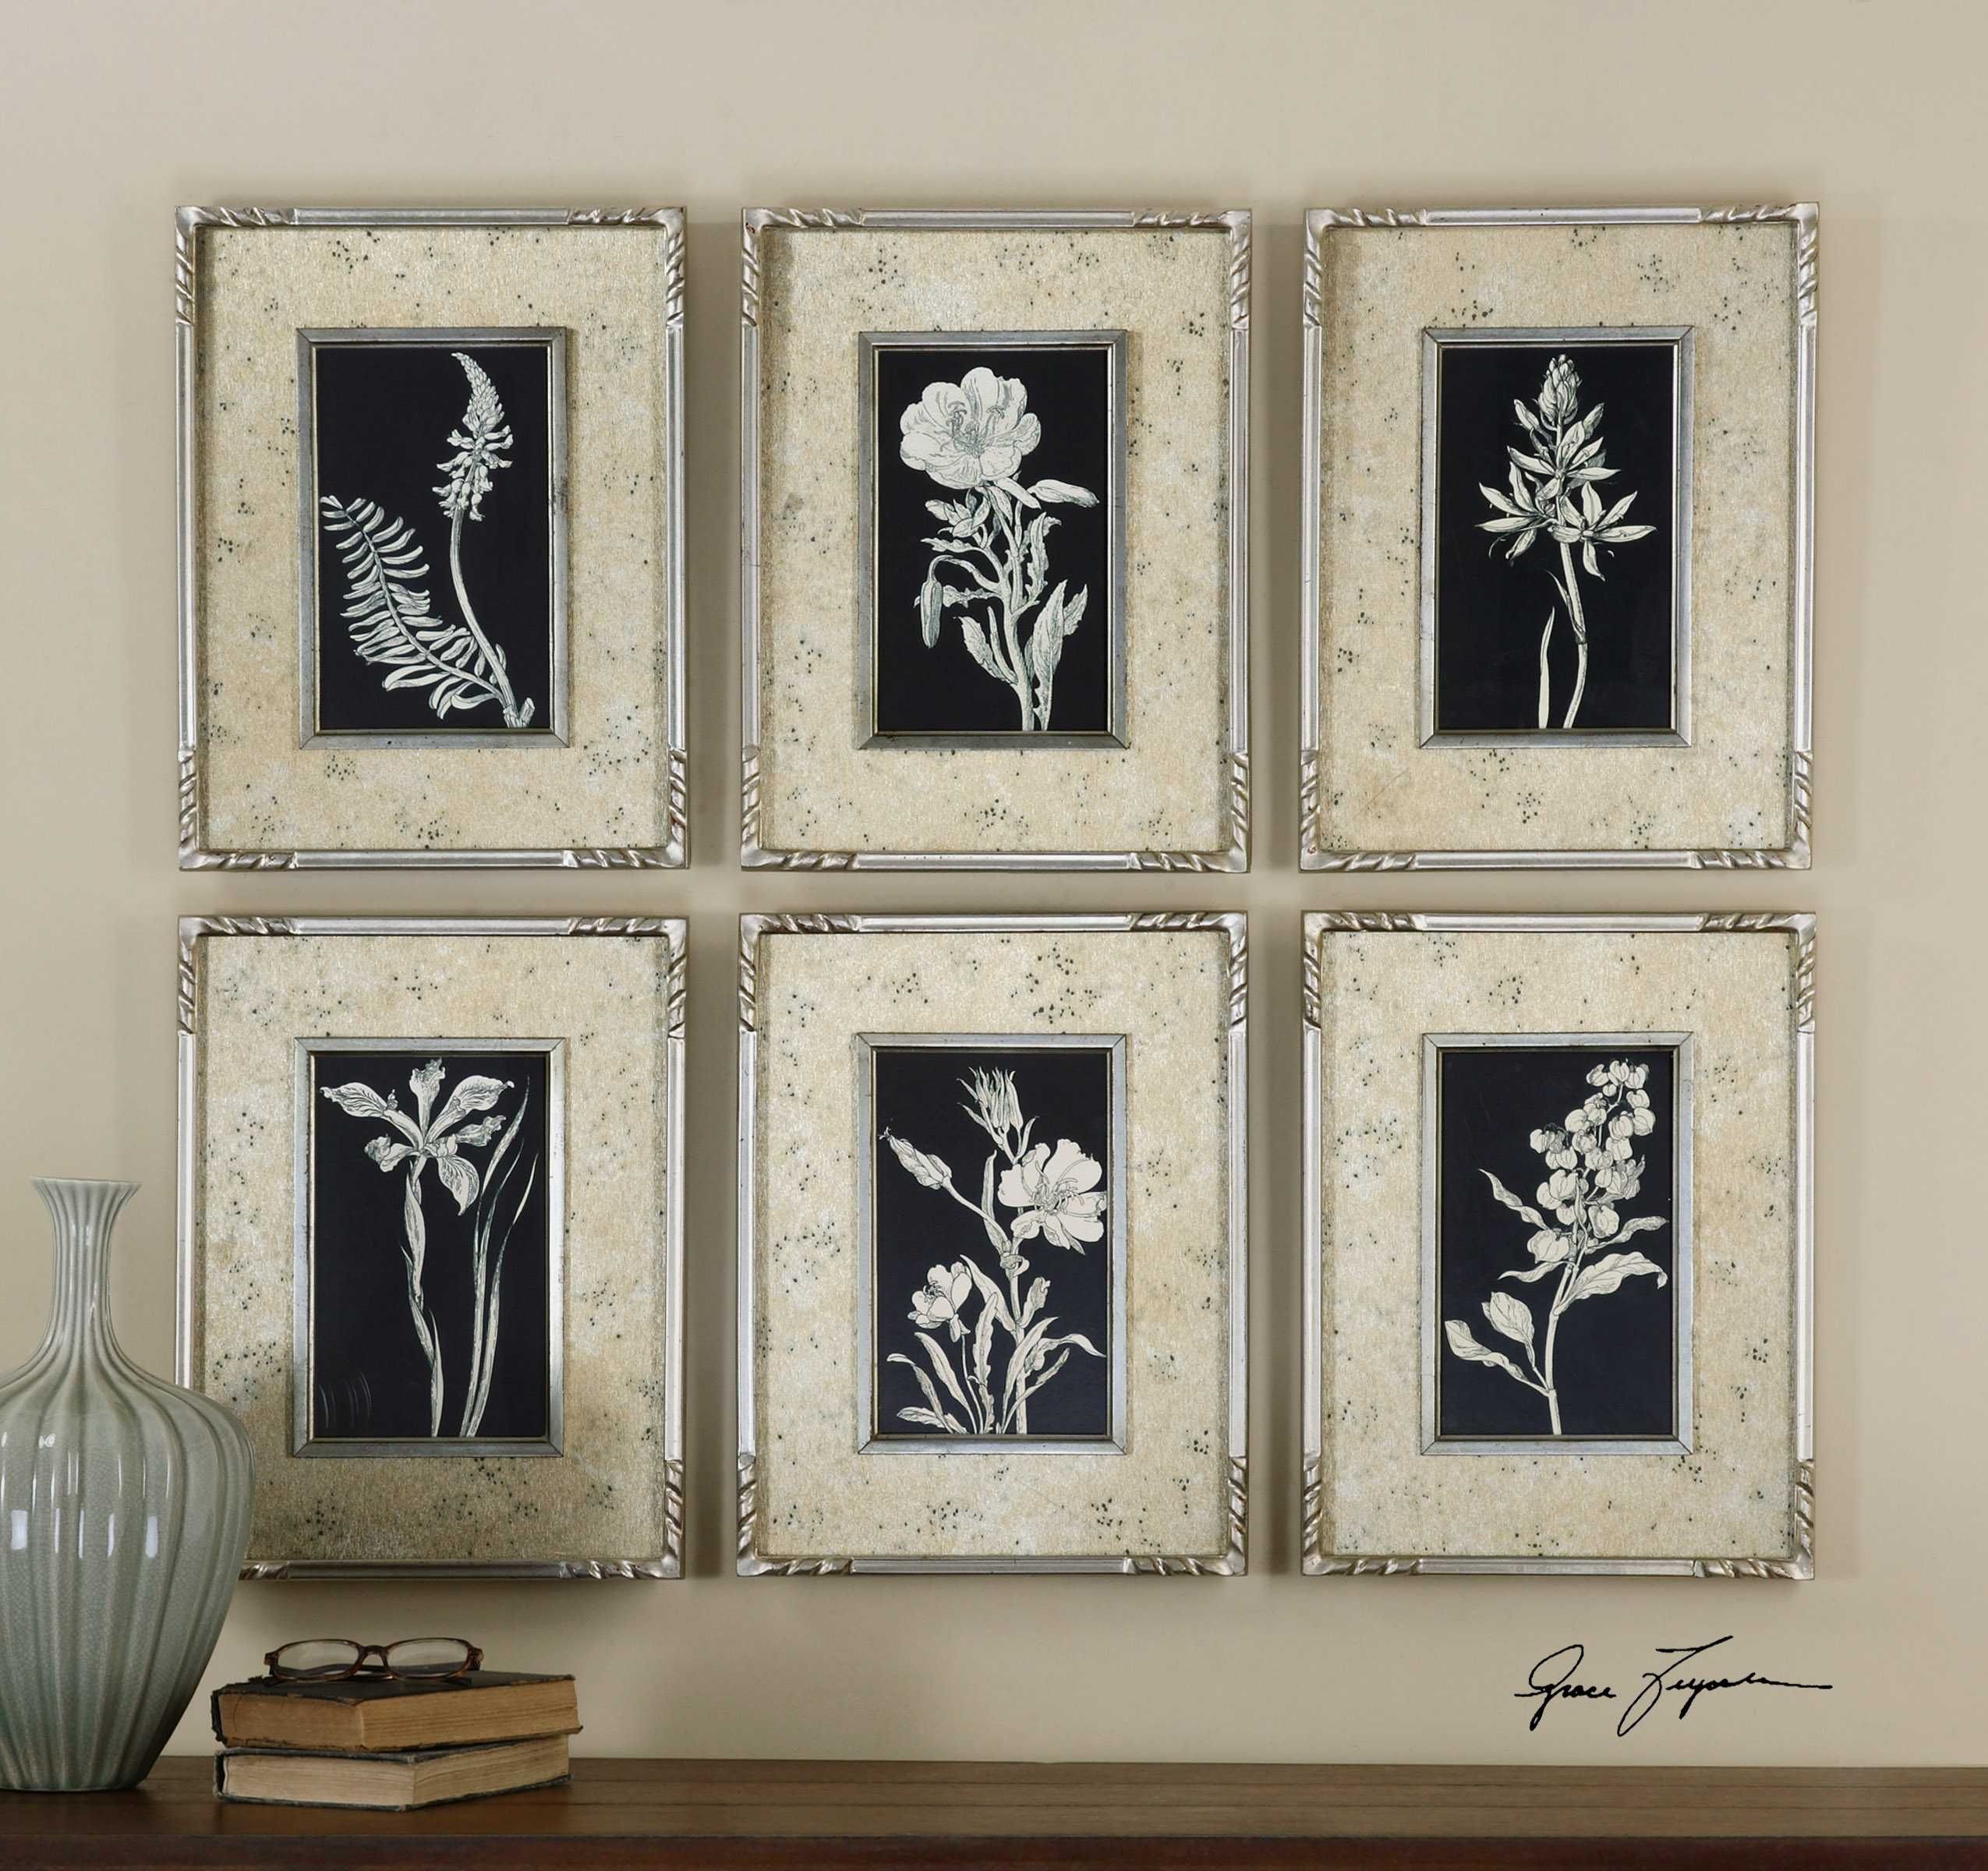 Uttermost Glowing Florals Framed Wall Art (6 Piece Set In Most Up To Date Wall Framed Art Prints (View 8 of 20)